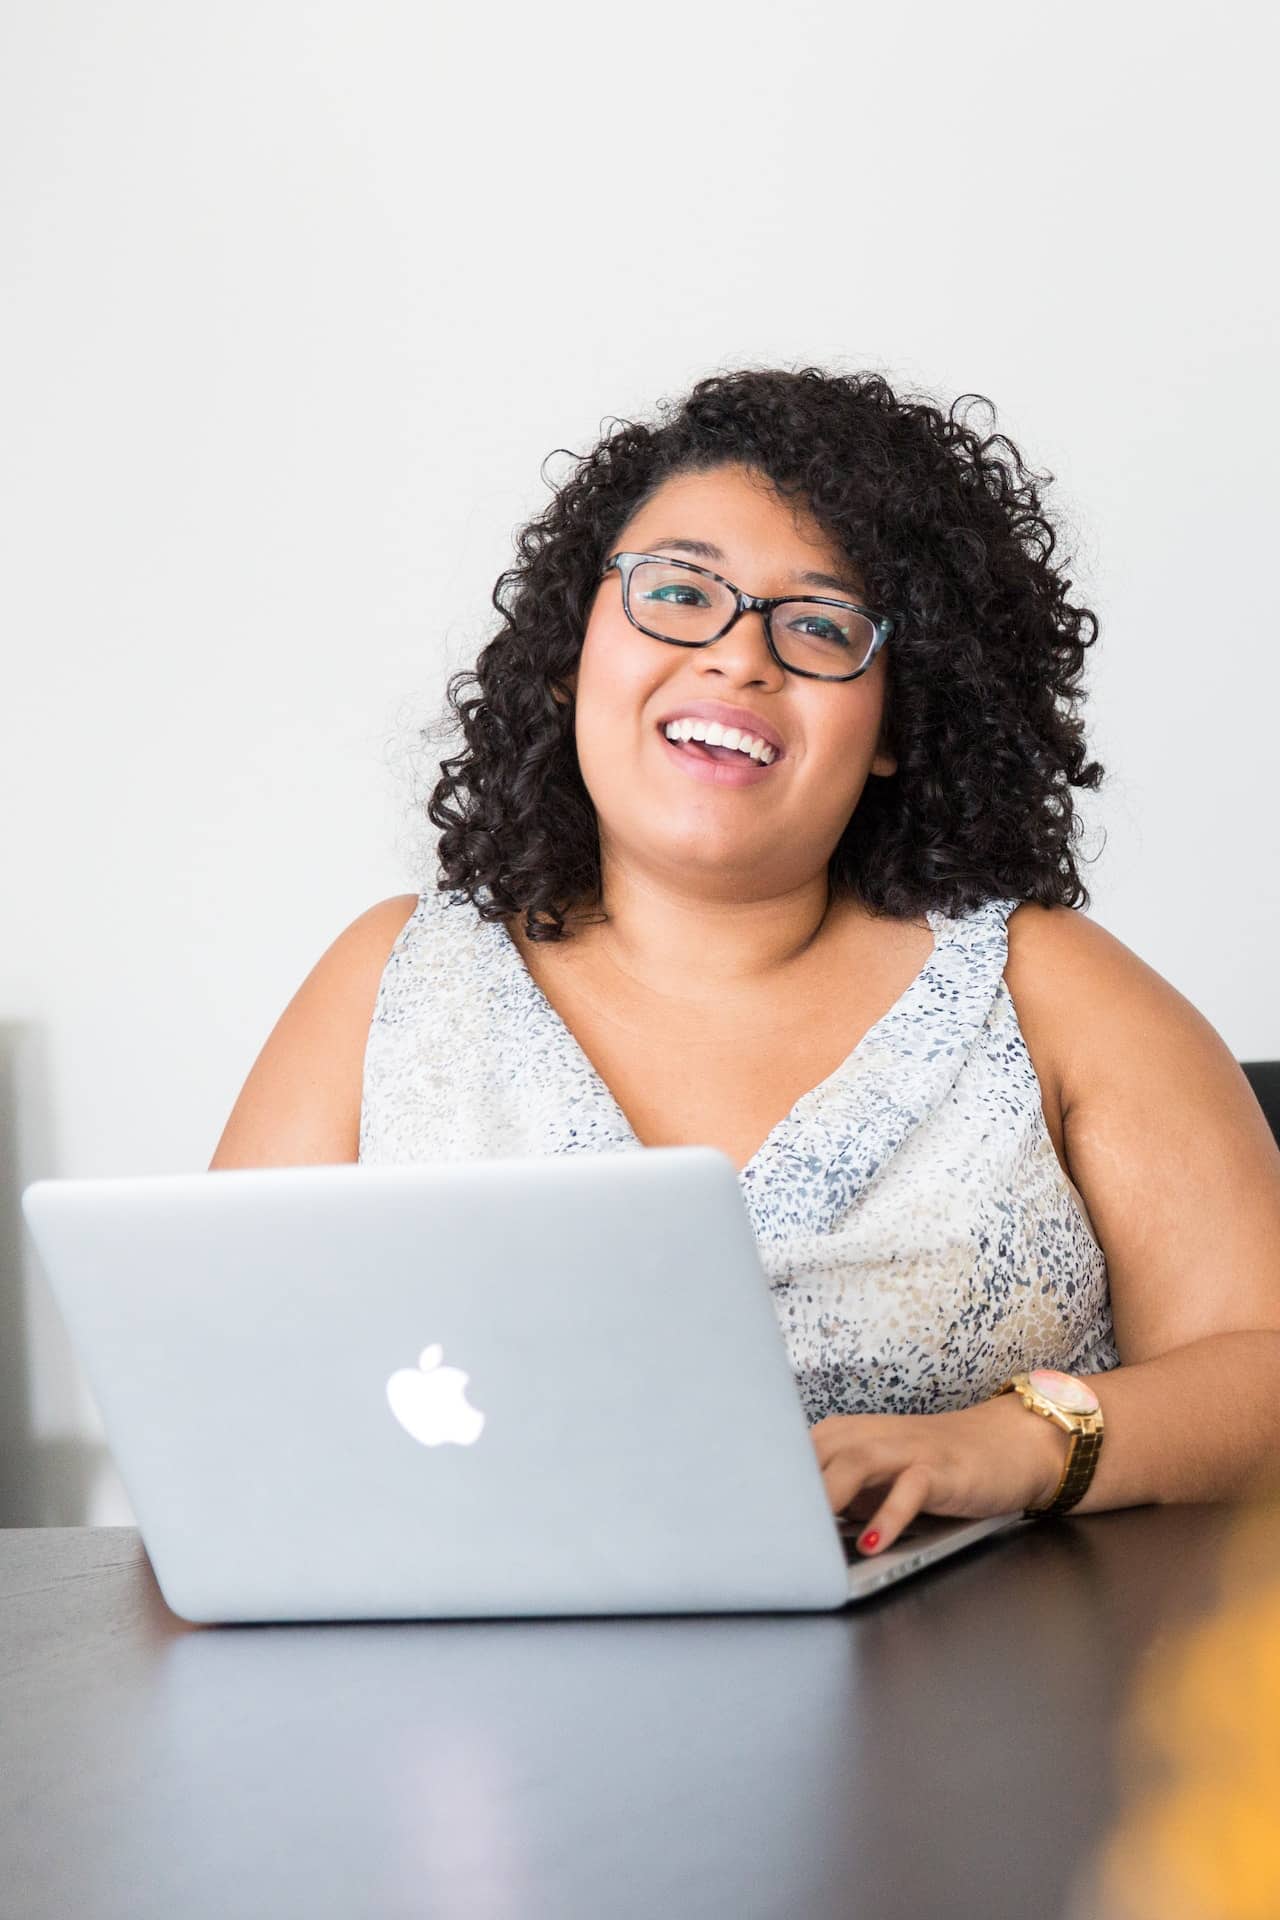 A curly haired woman with a medium complexion is sitting at her laptop smiling. She is wearing a sleeveless blouse and glasses. 